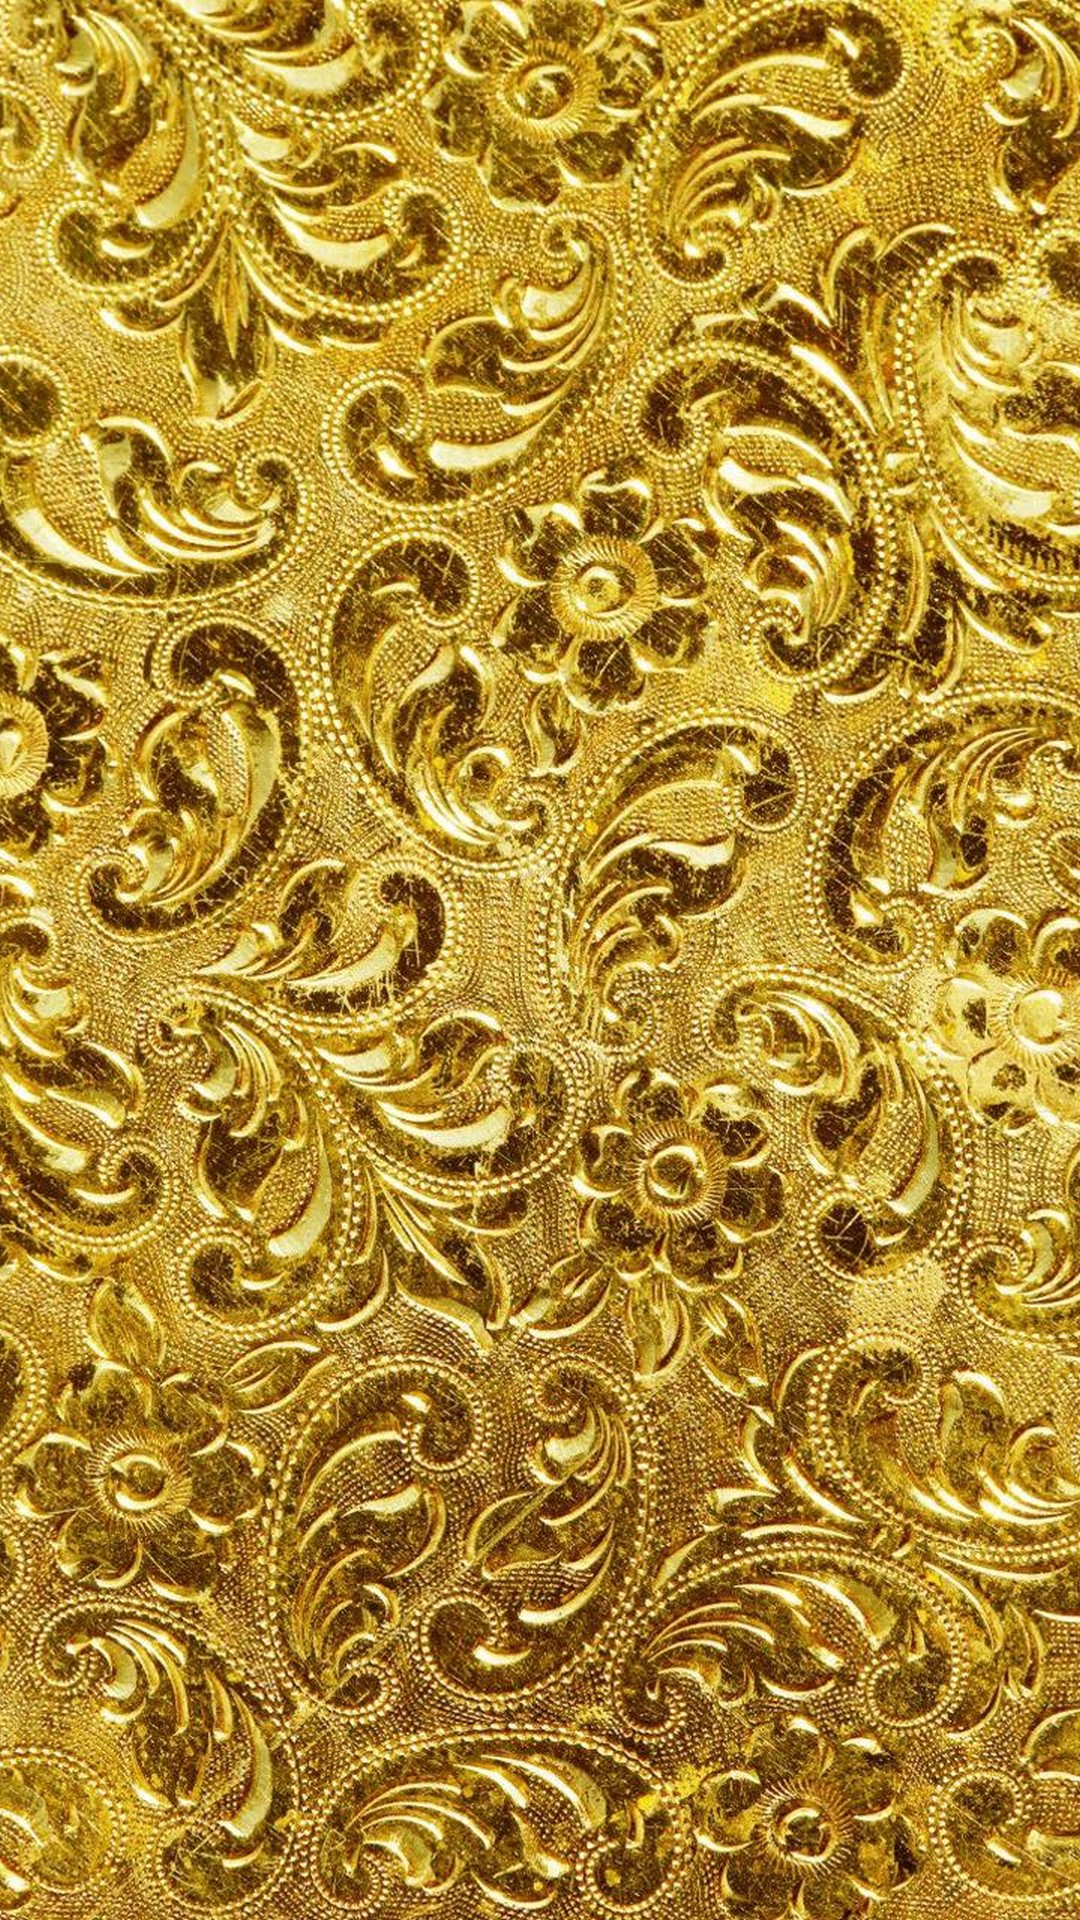 Gold Wallpaper Designs - Gold Wallpaper Designs For Iphone , HD Wallpaper & Backgrounds